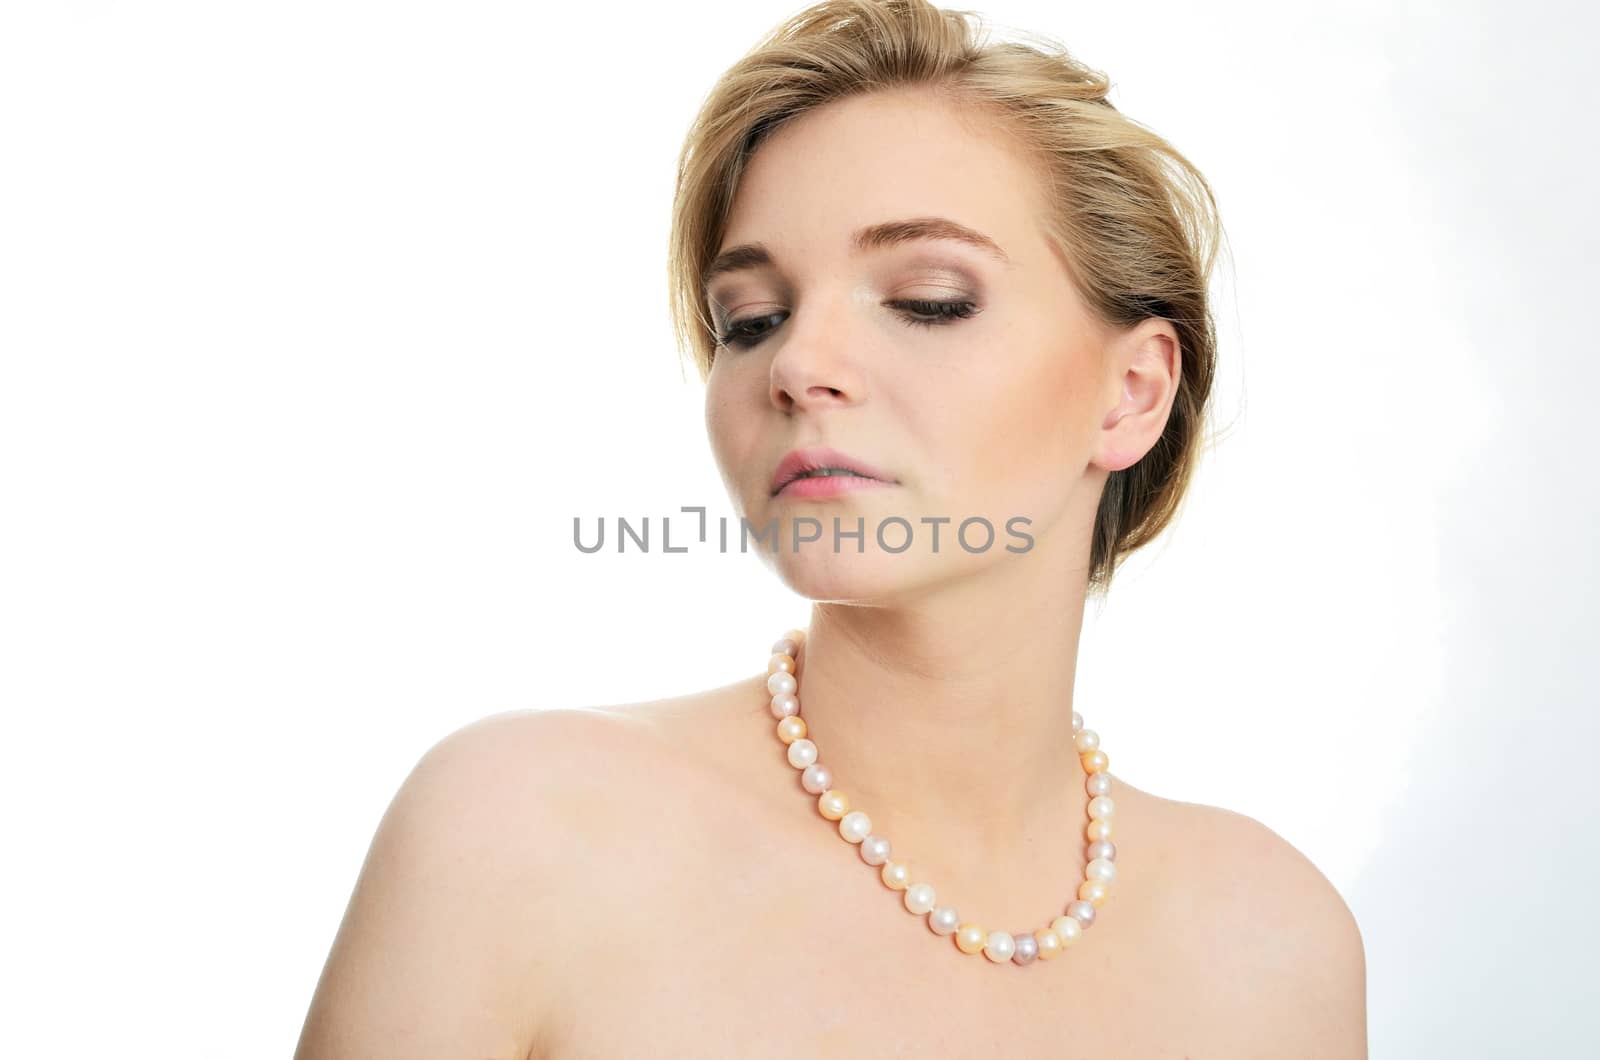 Beautiful female model with pearls on her neck. Portrait of young girl with soft and kind face expression.